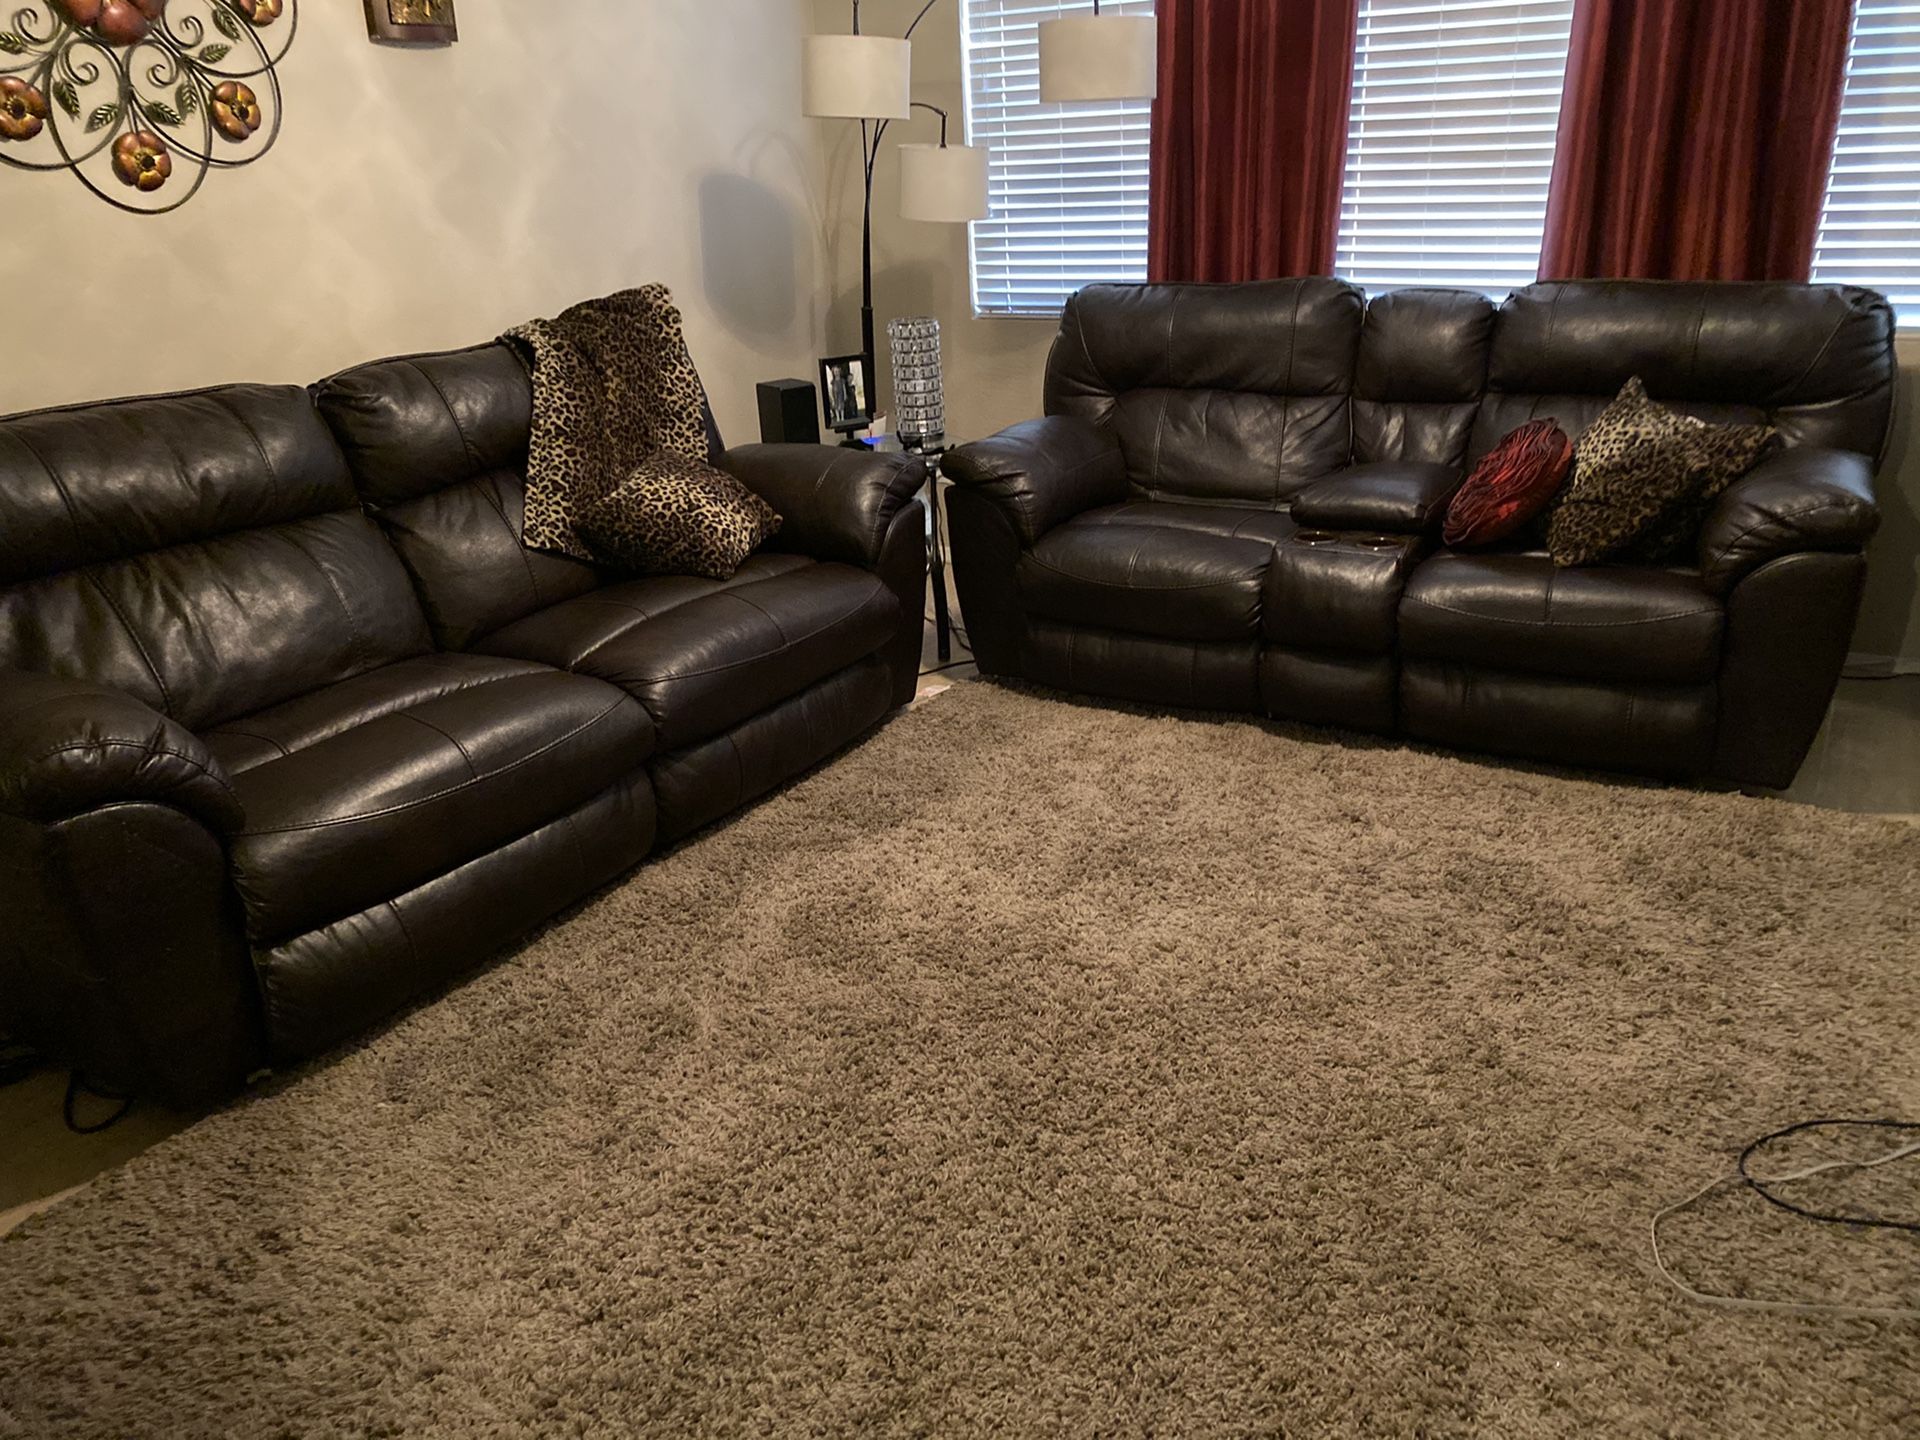 Couch set and rocking chair